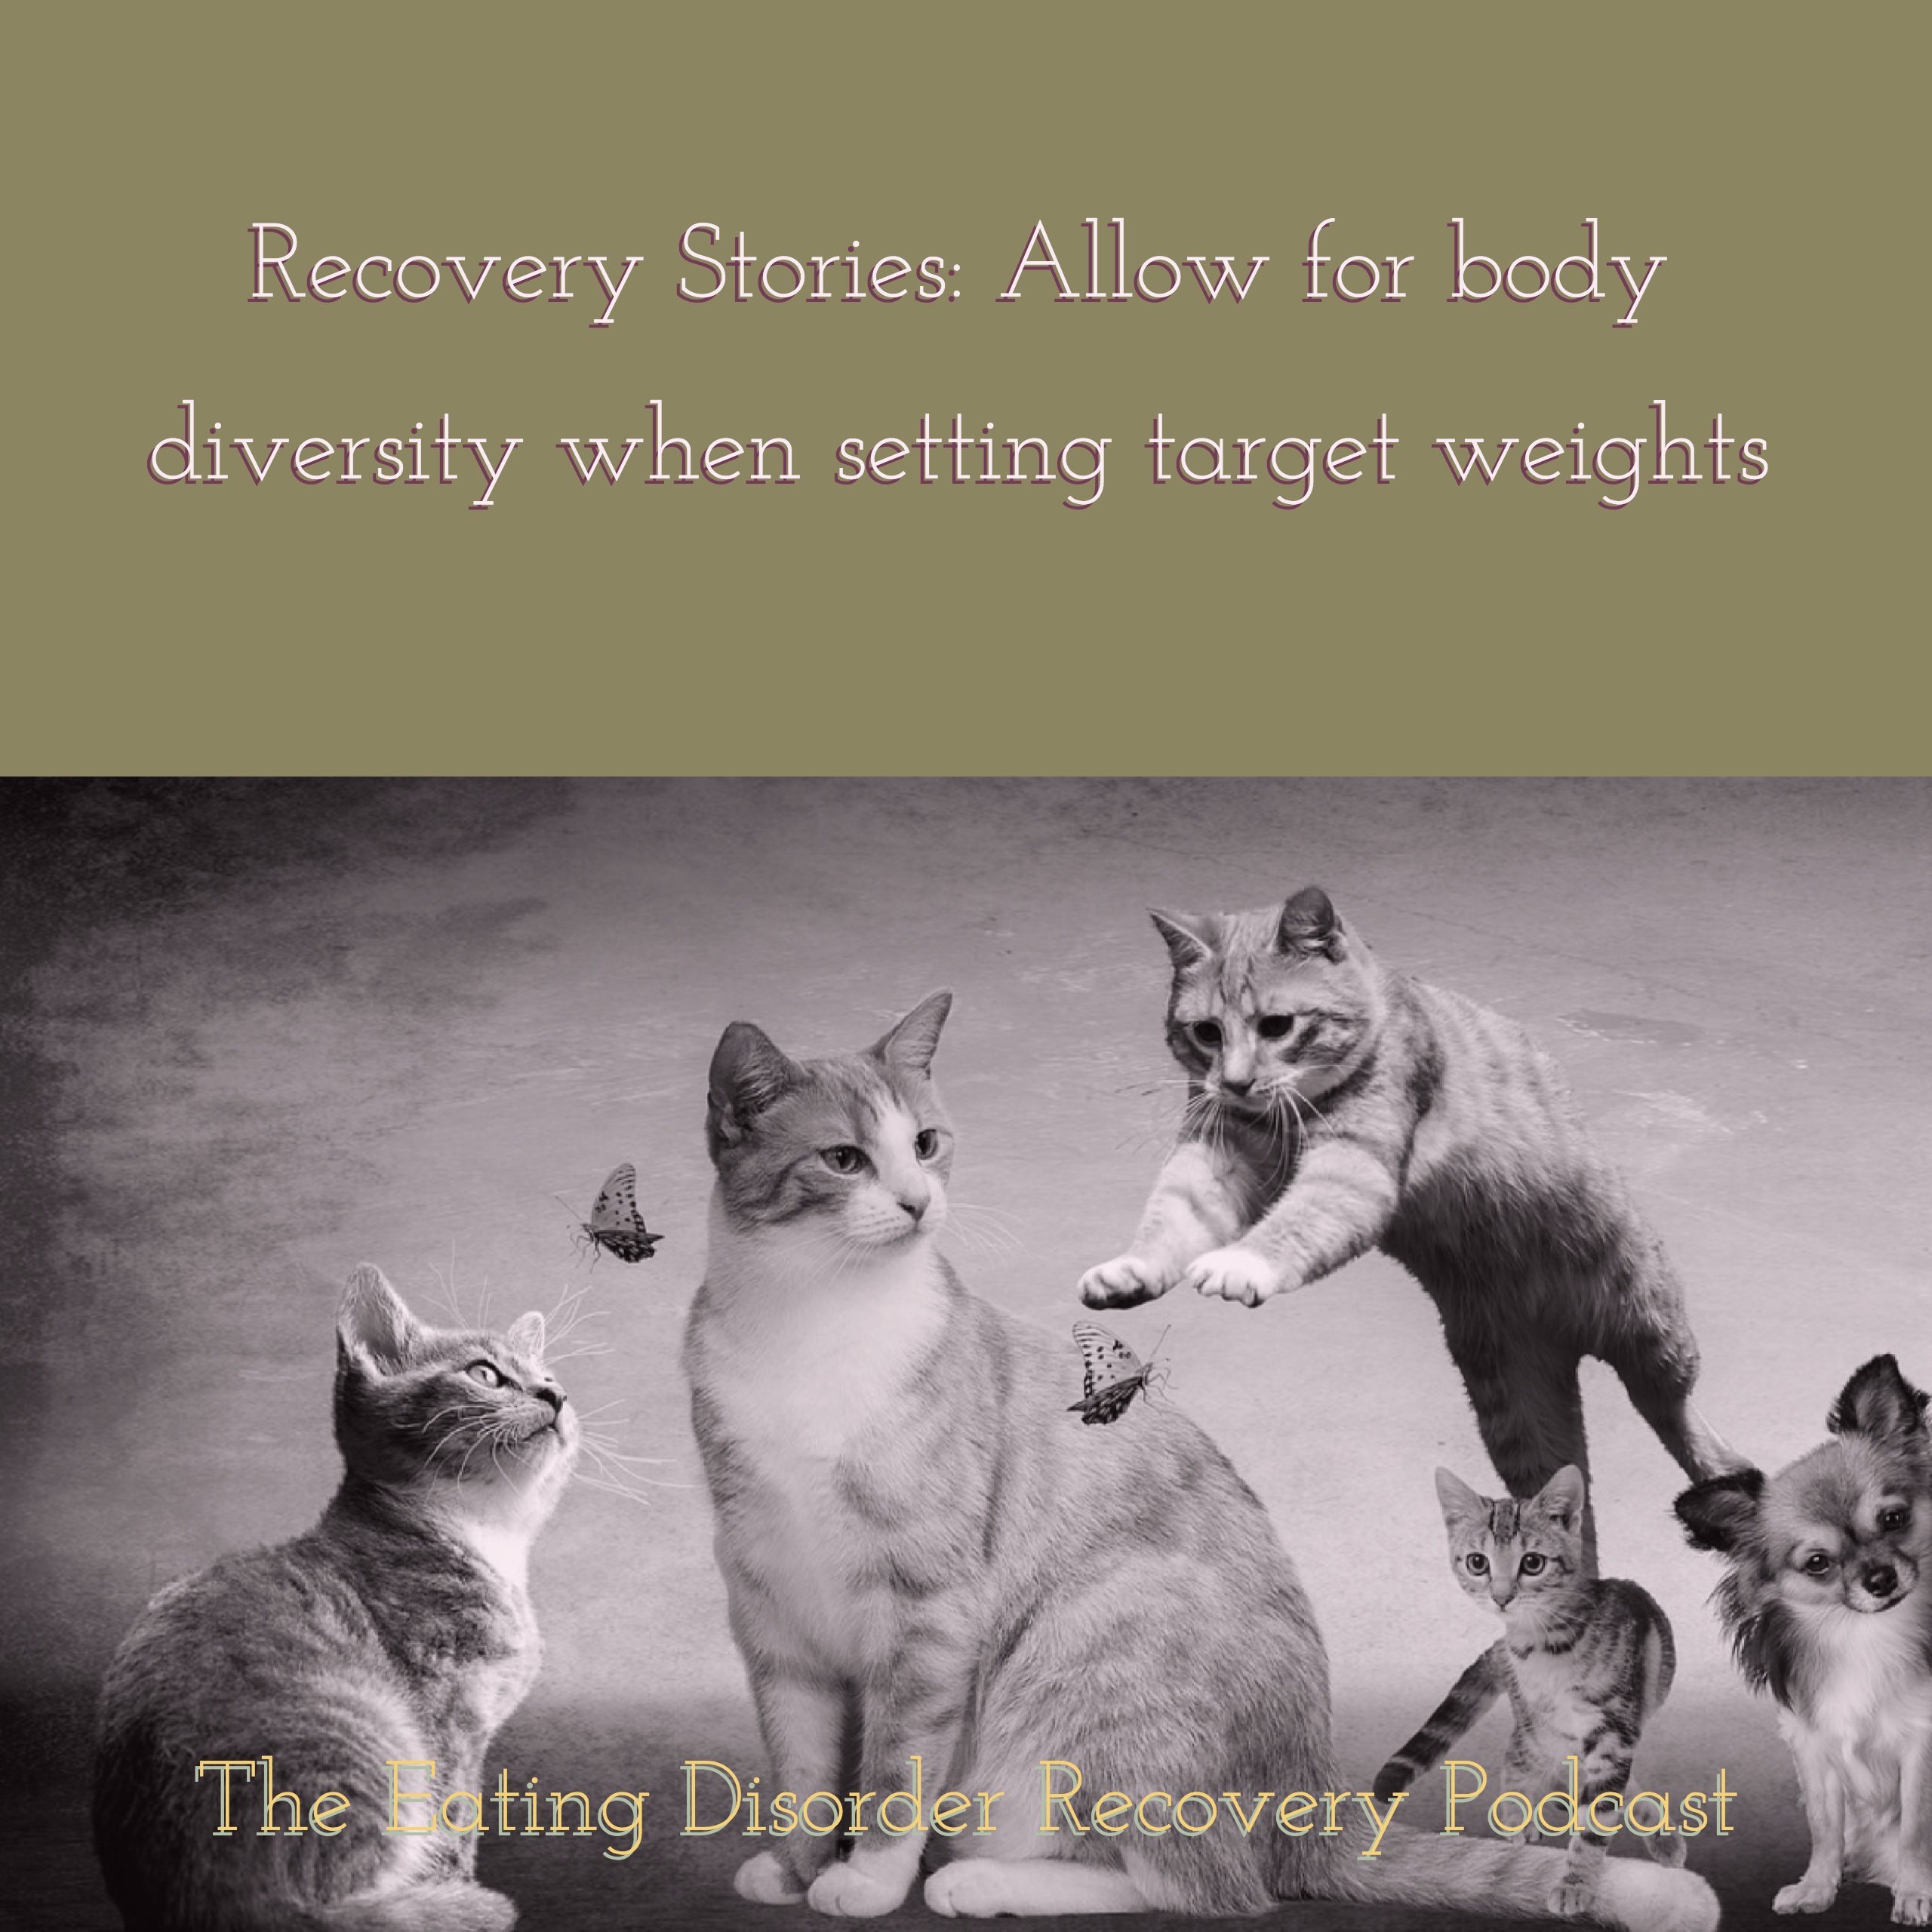 Recovery Stories: Allow for body diversity when setting target weights